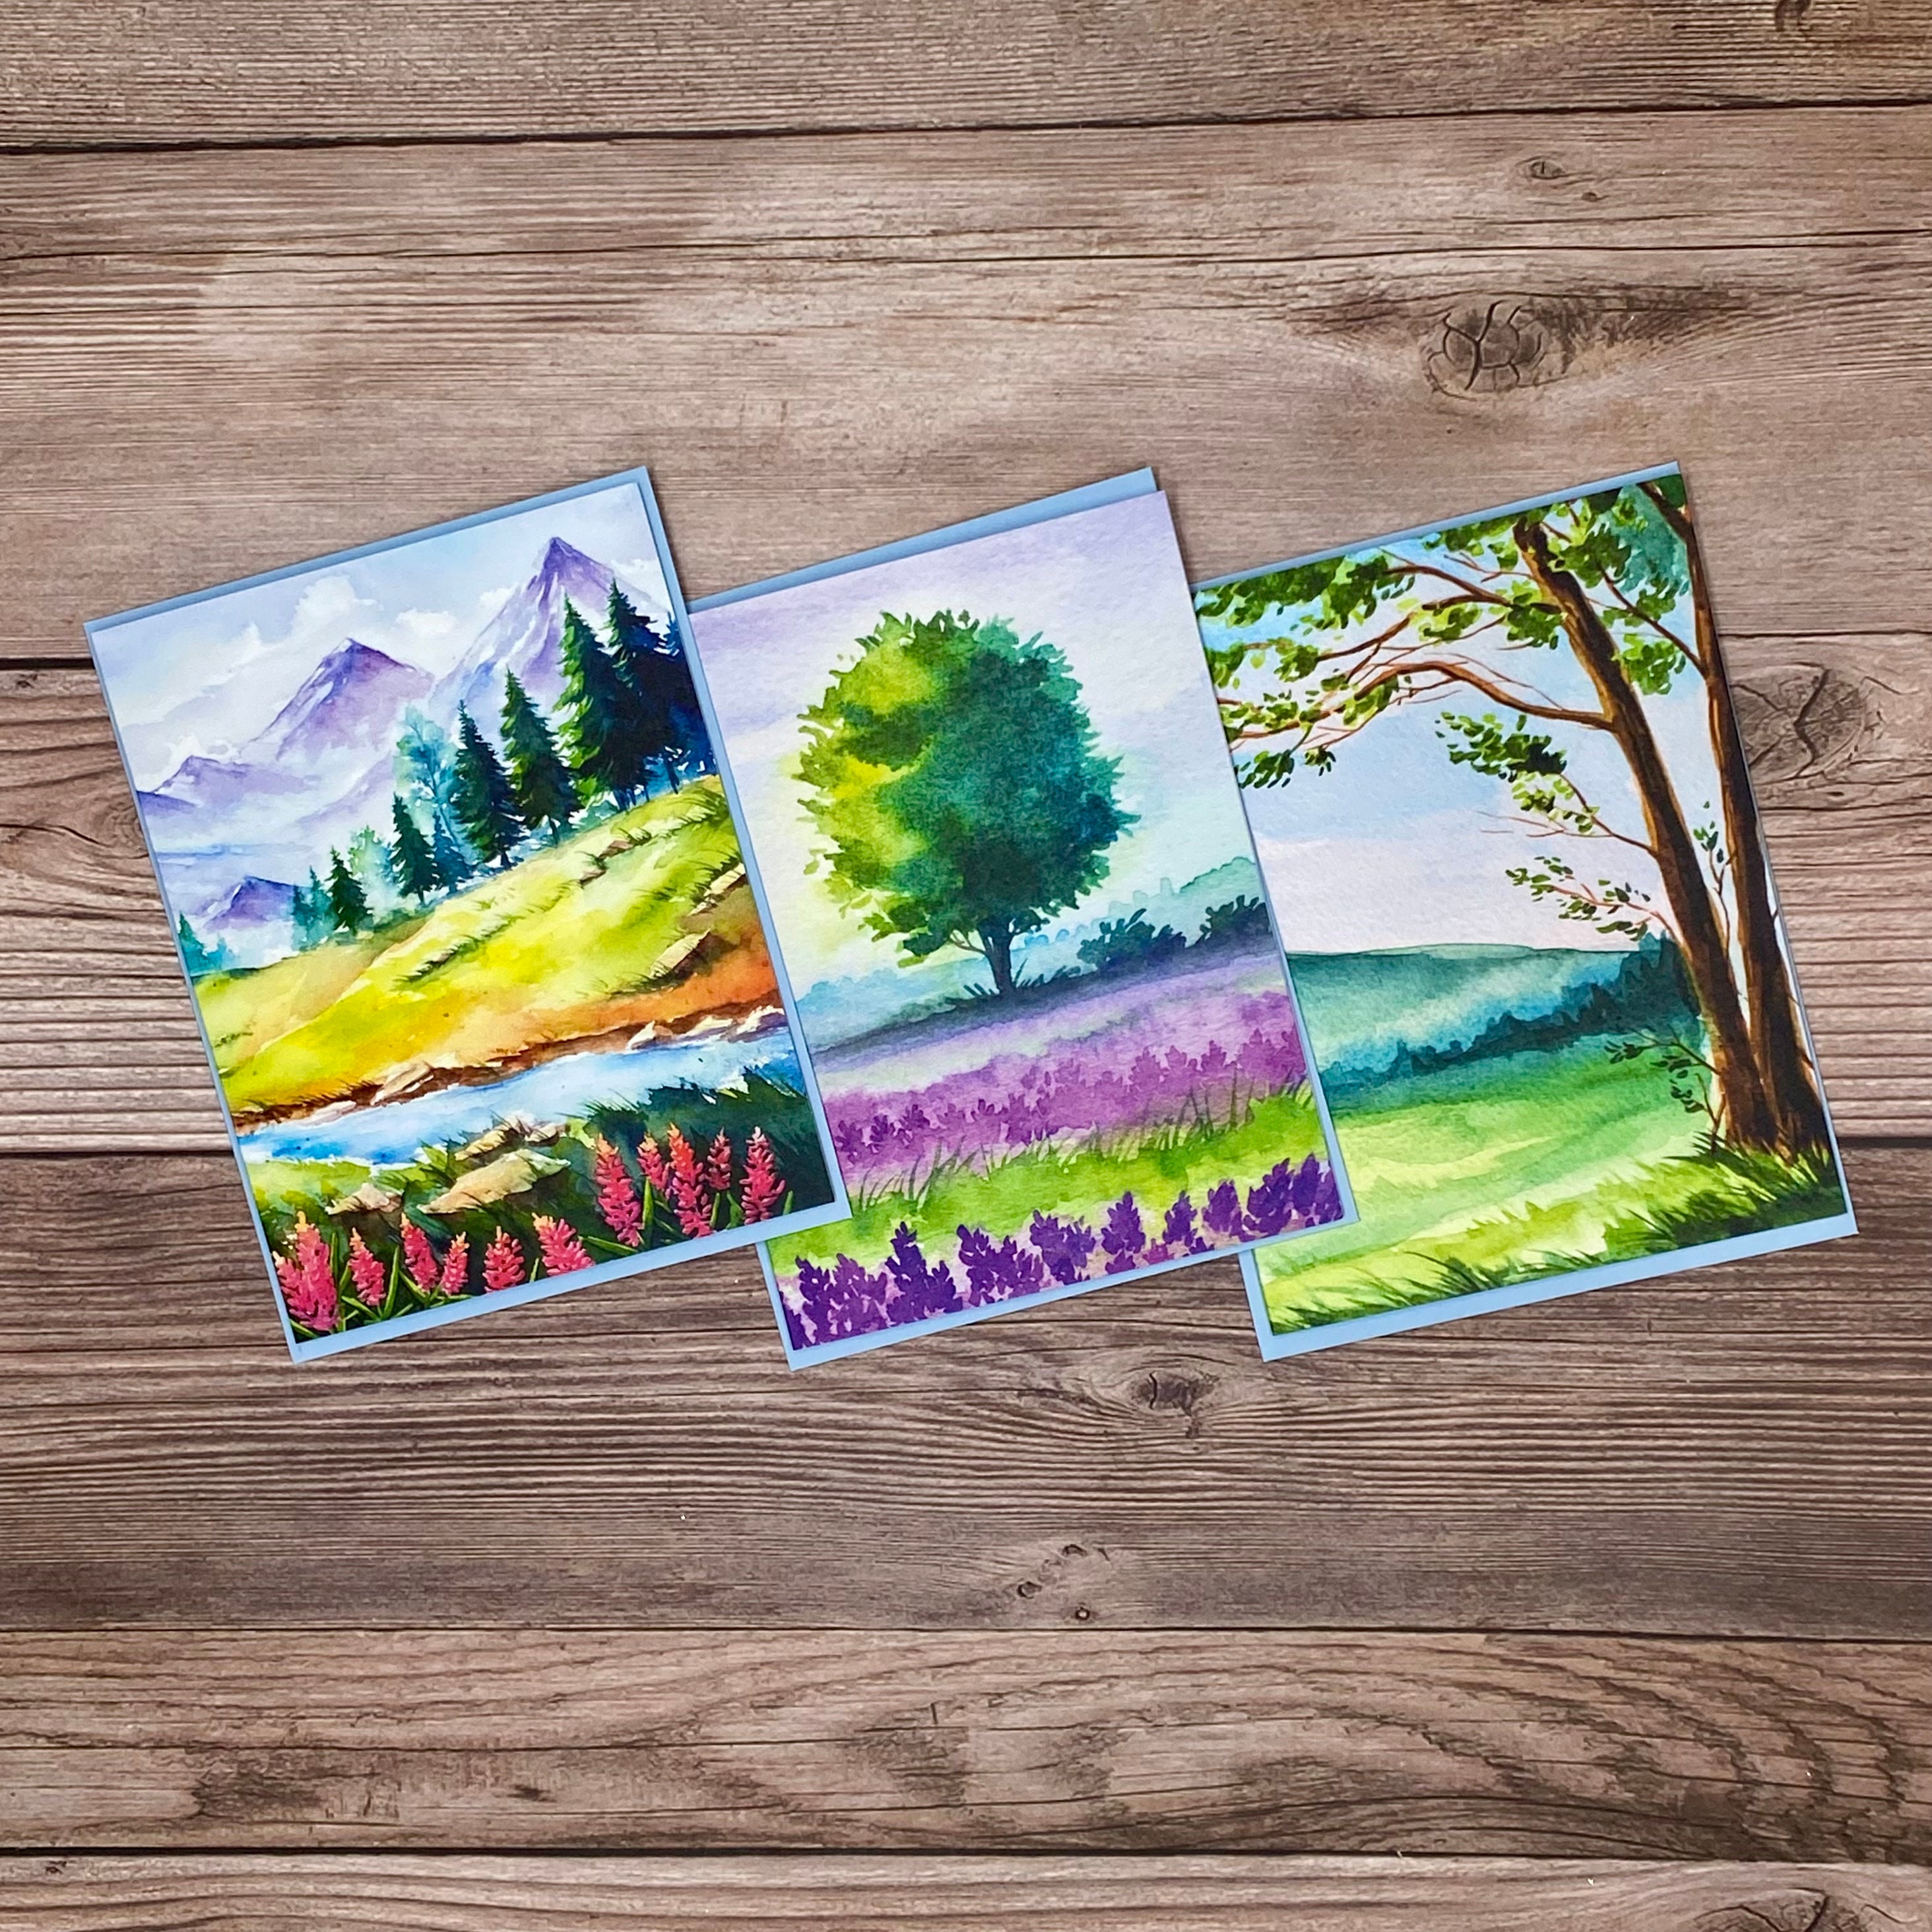 Imagination Watercolor Postcards - Unique Decor and Gifts - Total